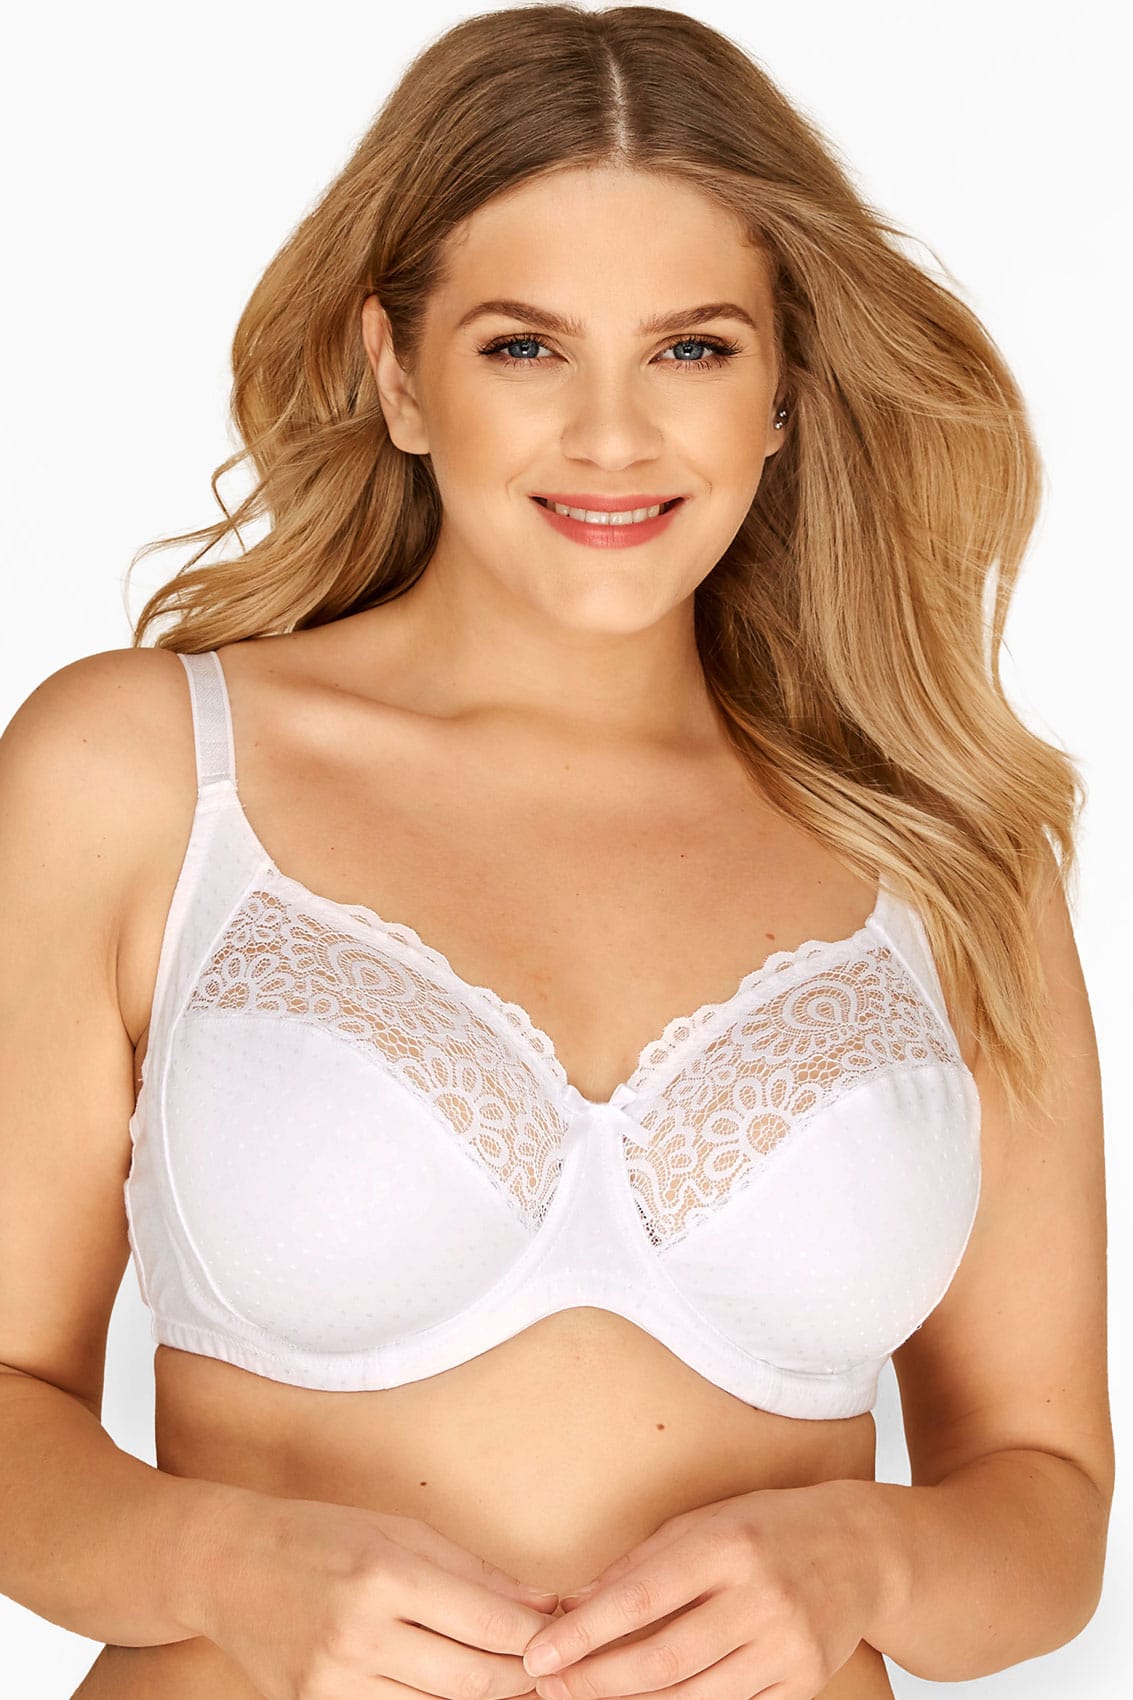 White Cotton Rich Spot And Lace Underwired Bra Sizes 38dd To 48g 